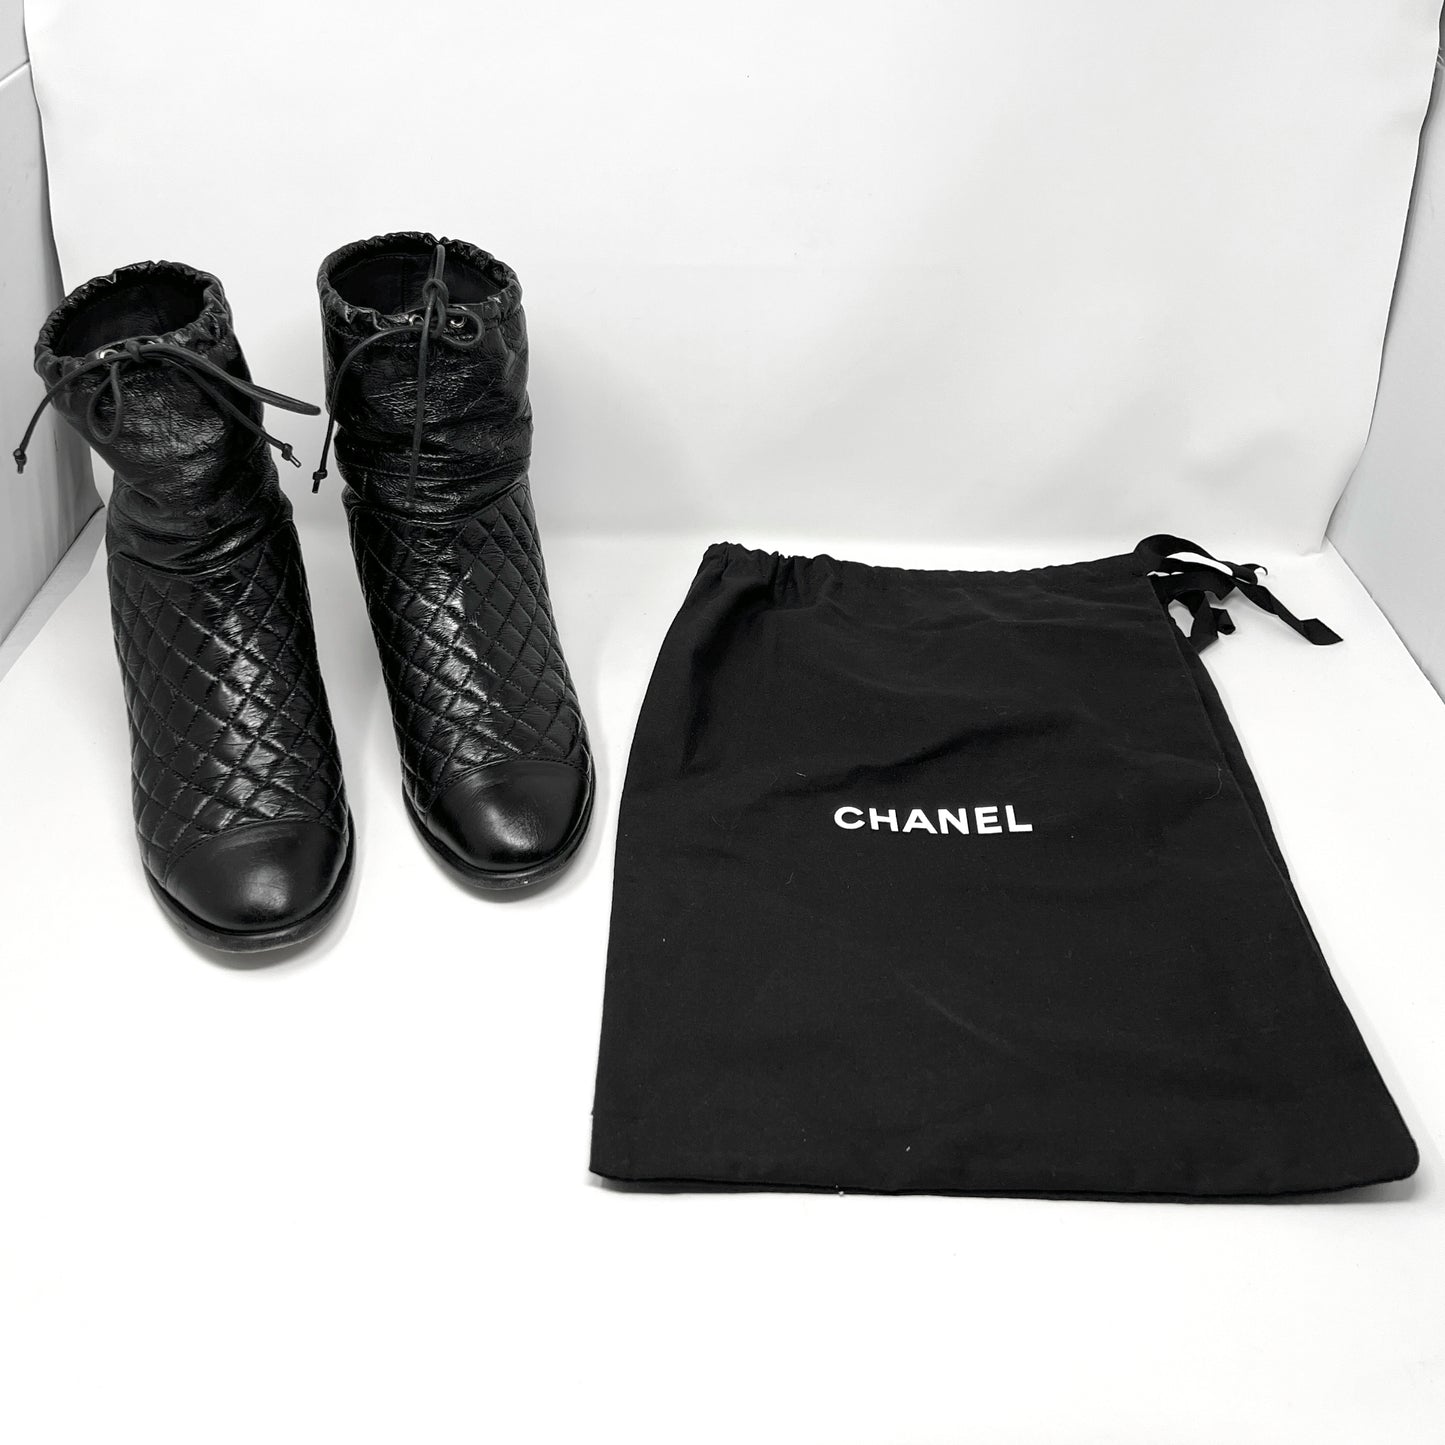 Chanel Black Matelasse Quilted Patent Leather Cap Toe Block Heel Mid Calf Boots Size EU 40